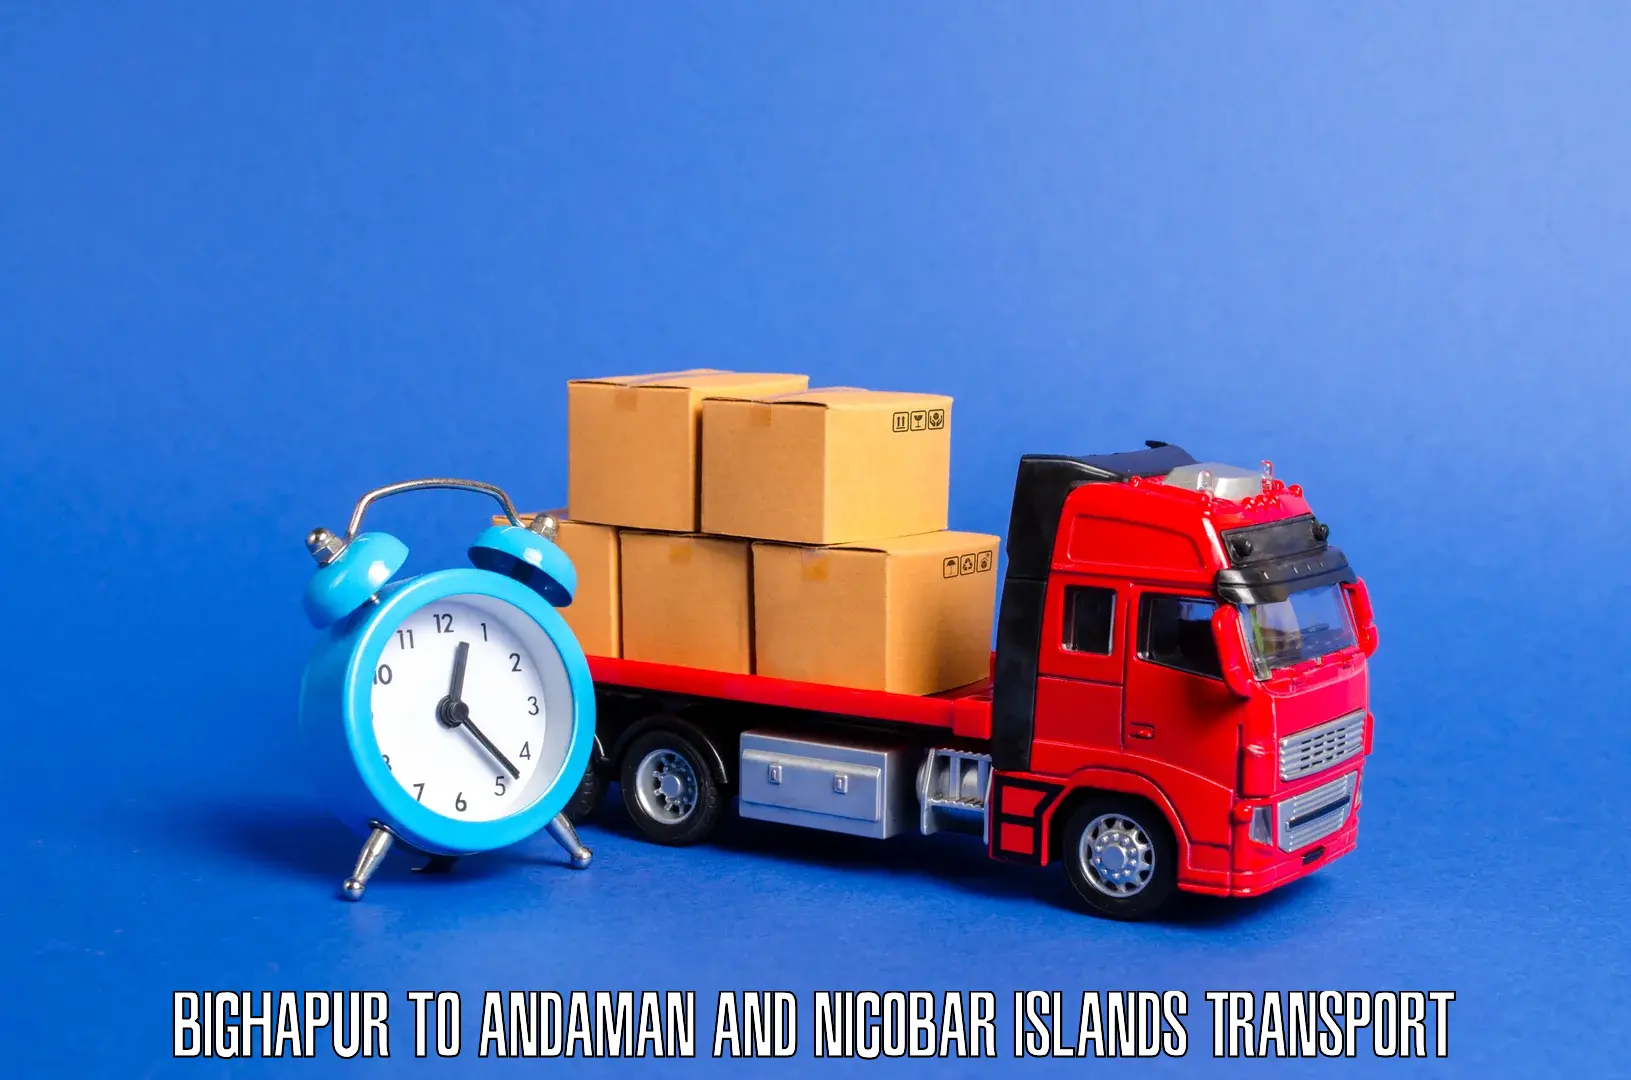 Daily parcel service transport Bighapur to Andaman and Nicobar Islands